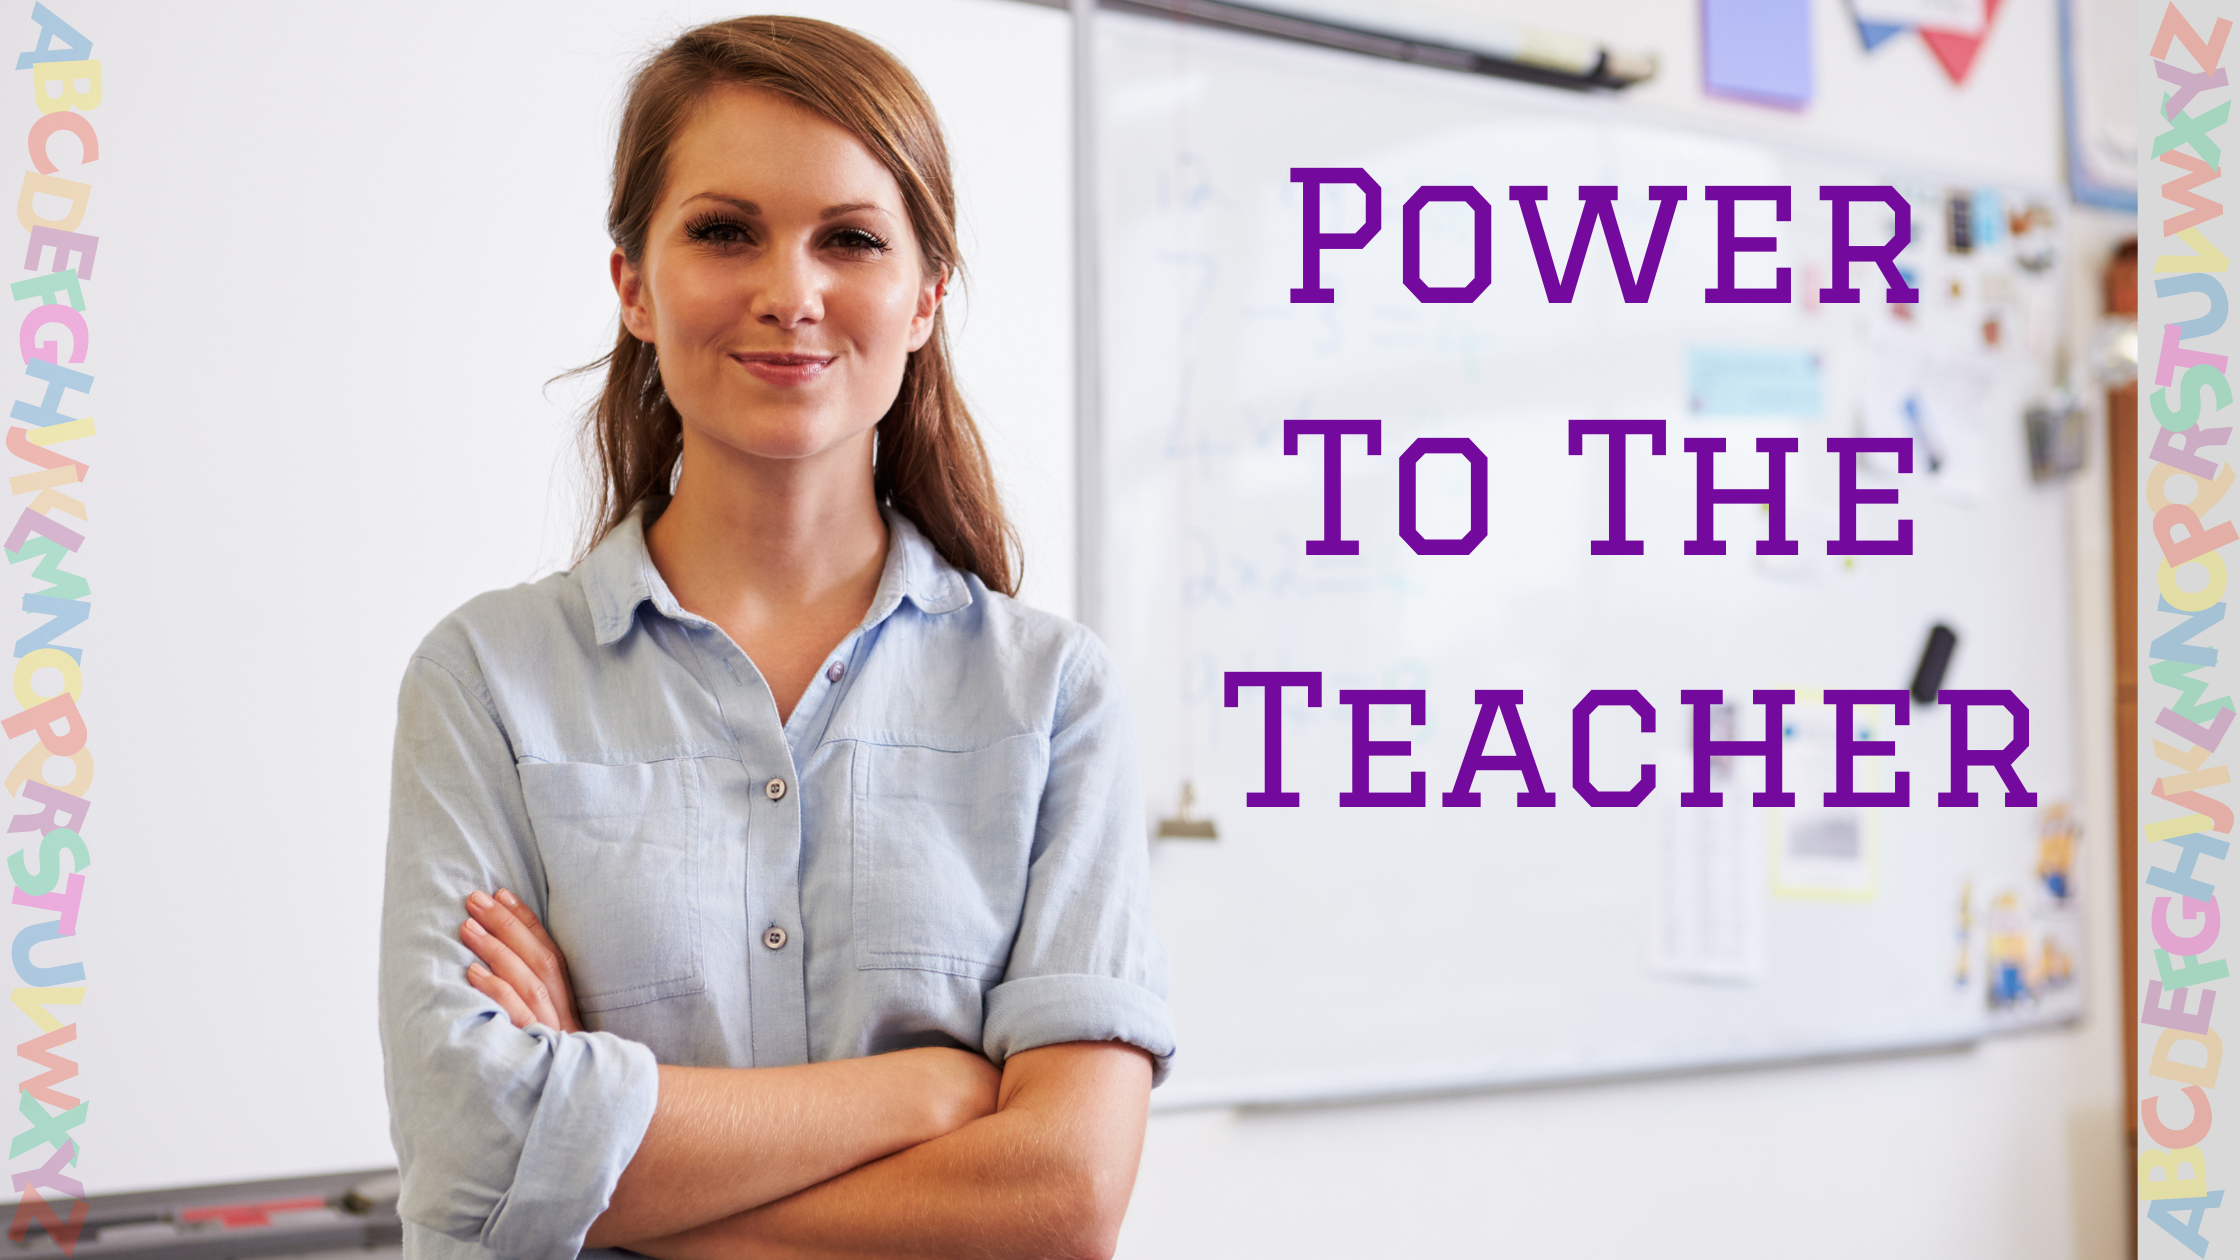 Power to the Teacher teacher with arms crossed looking empowered